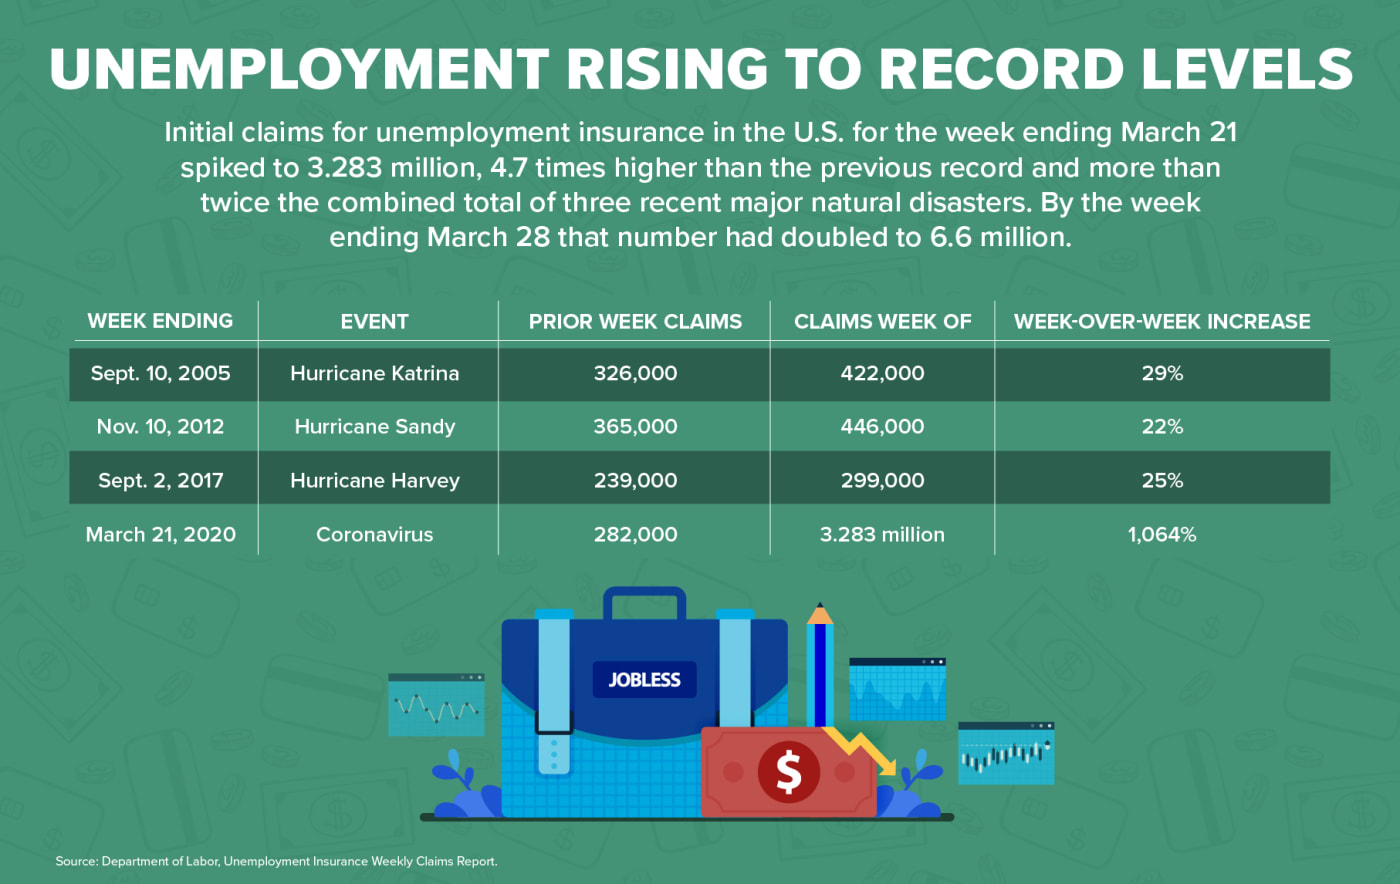 Unemployment Rising to Record Levels